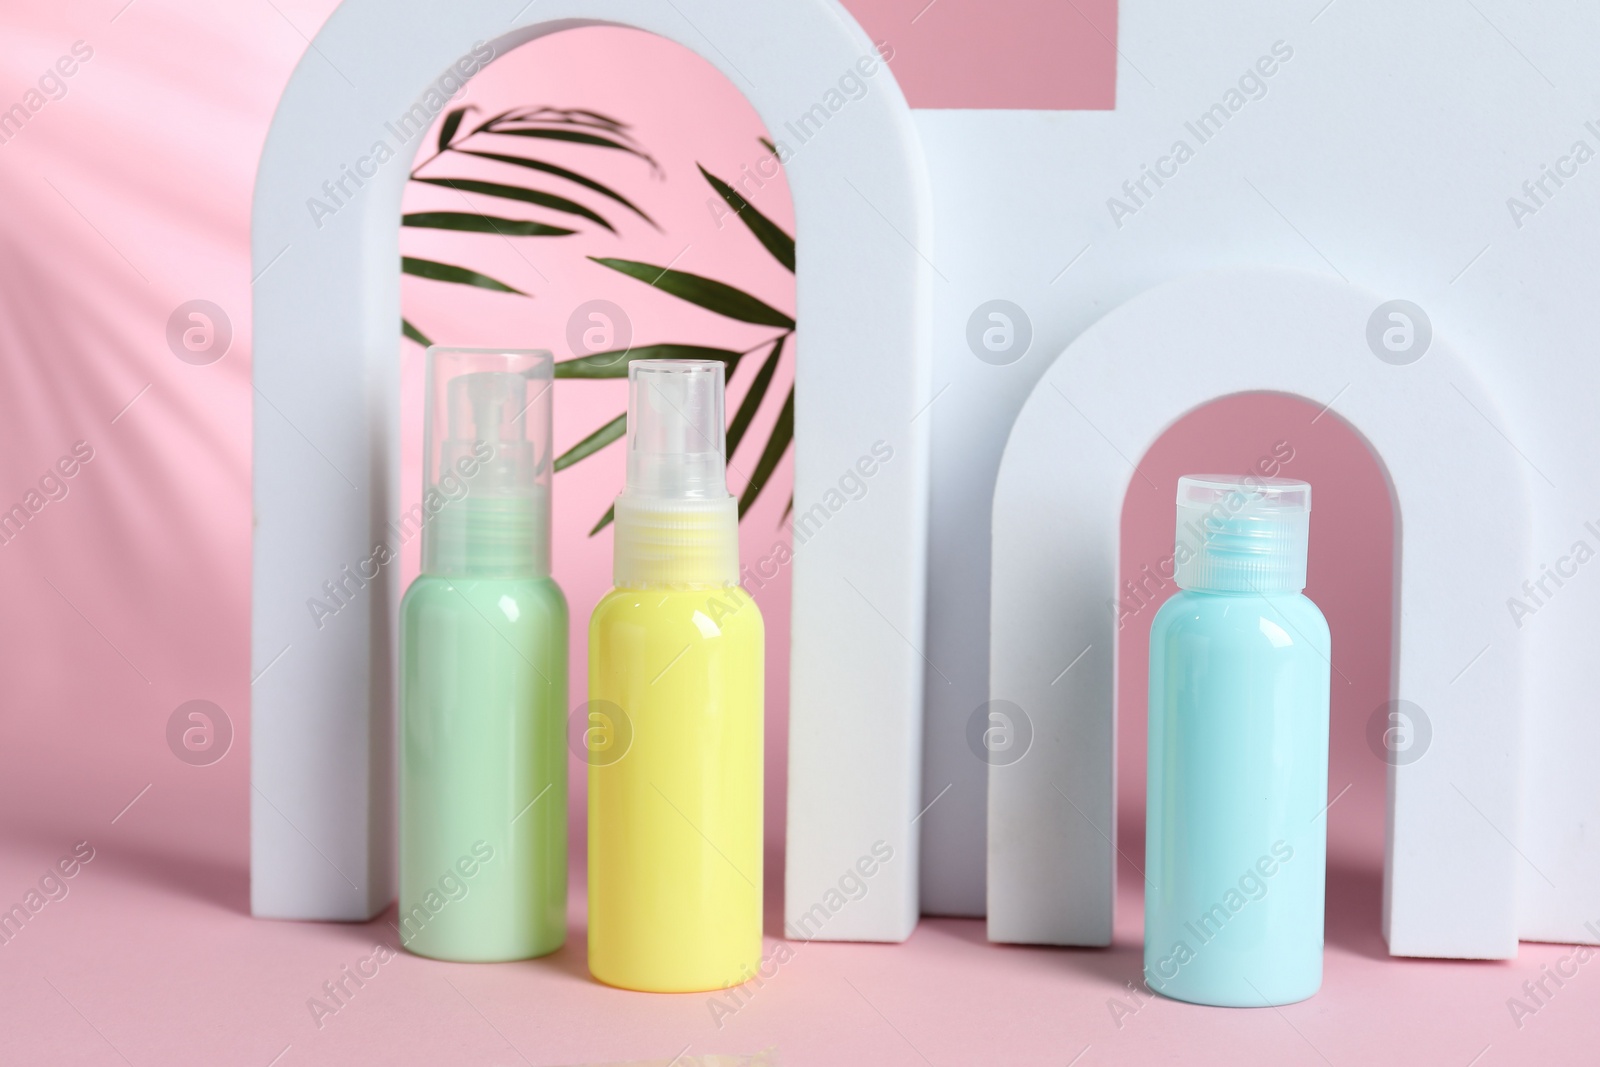 Photo of Cosmetic travel kit and geometric figures on pink background. Bath accessories